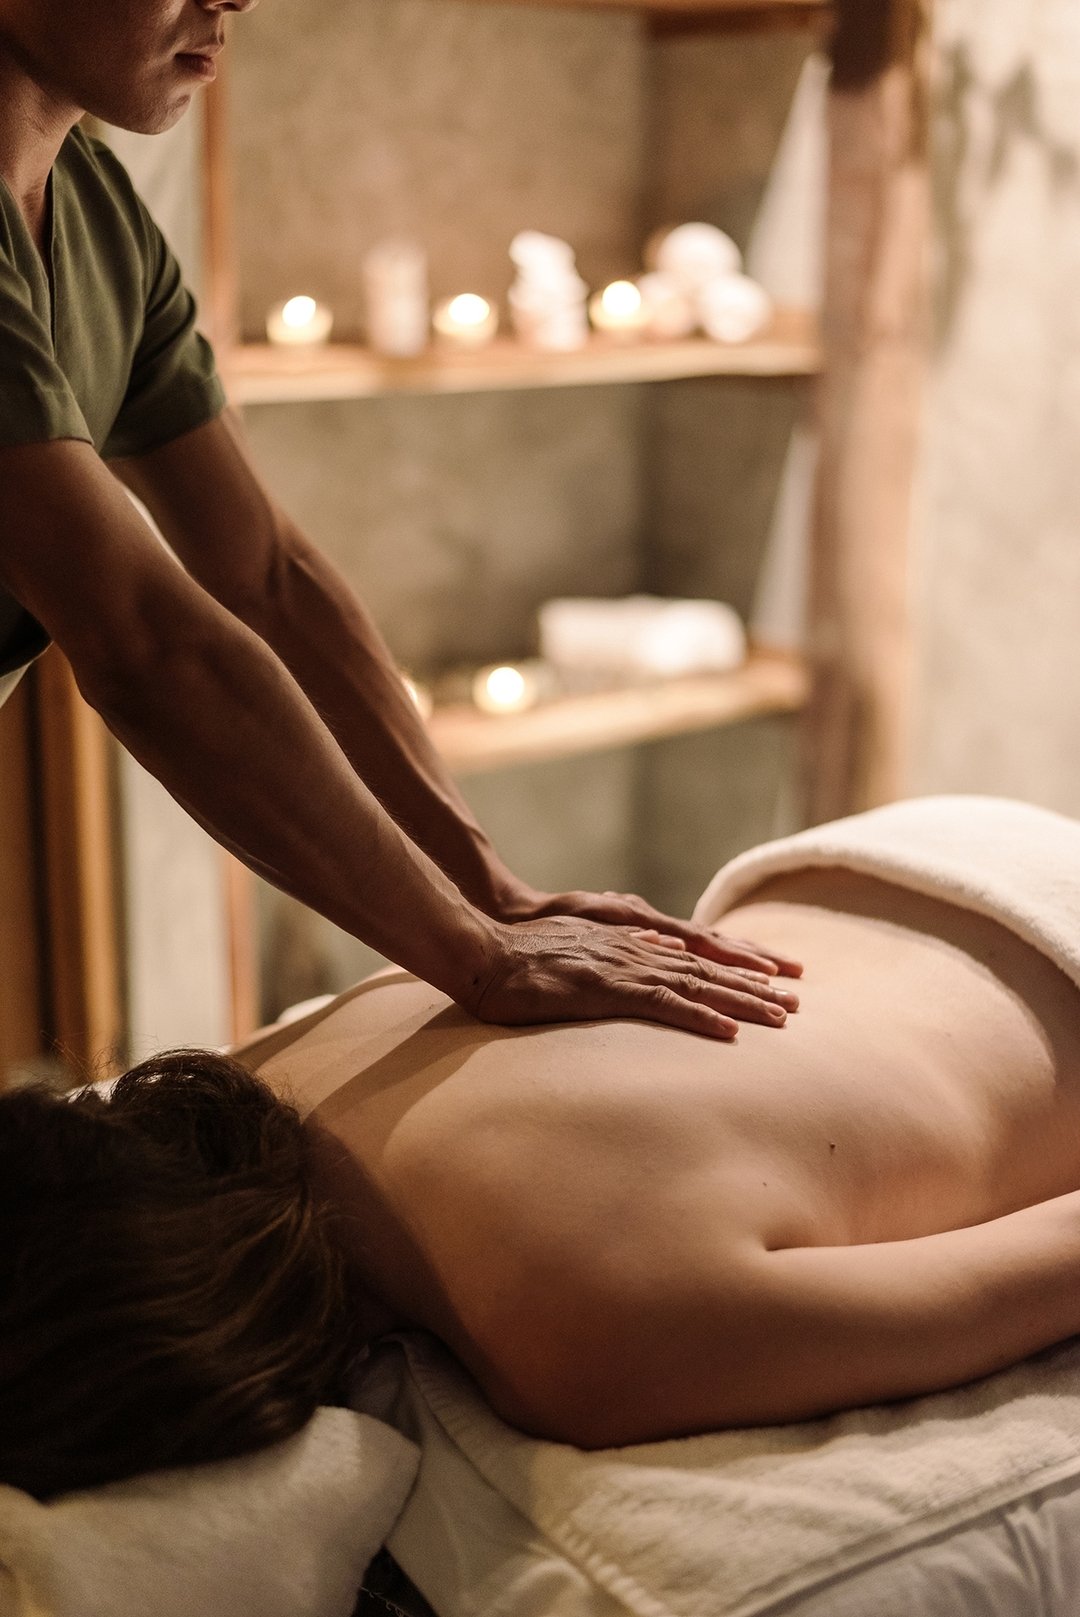 At all La Valise destinations, SPA indulgence remains a cornerstone of our ethos. Did you know that we've established a dedicated La Valise SPA in Tulum, where you can immerse yourself in the finest of our distinctive offerings within a space devoted